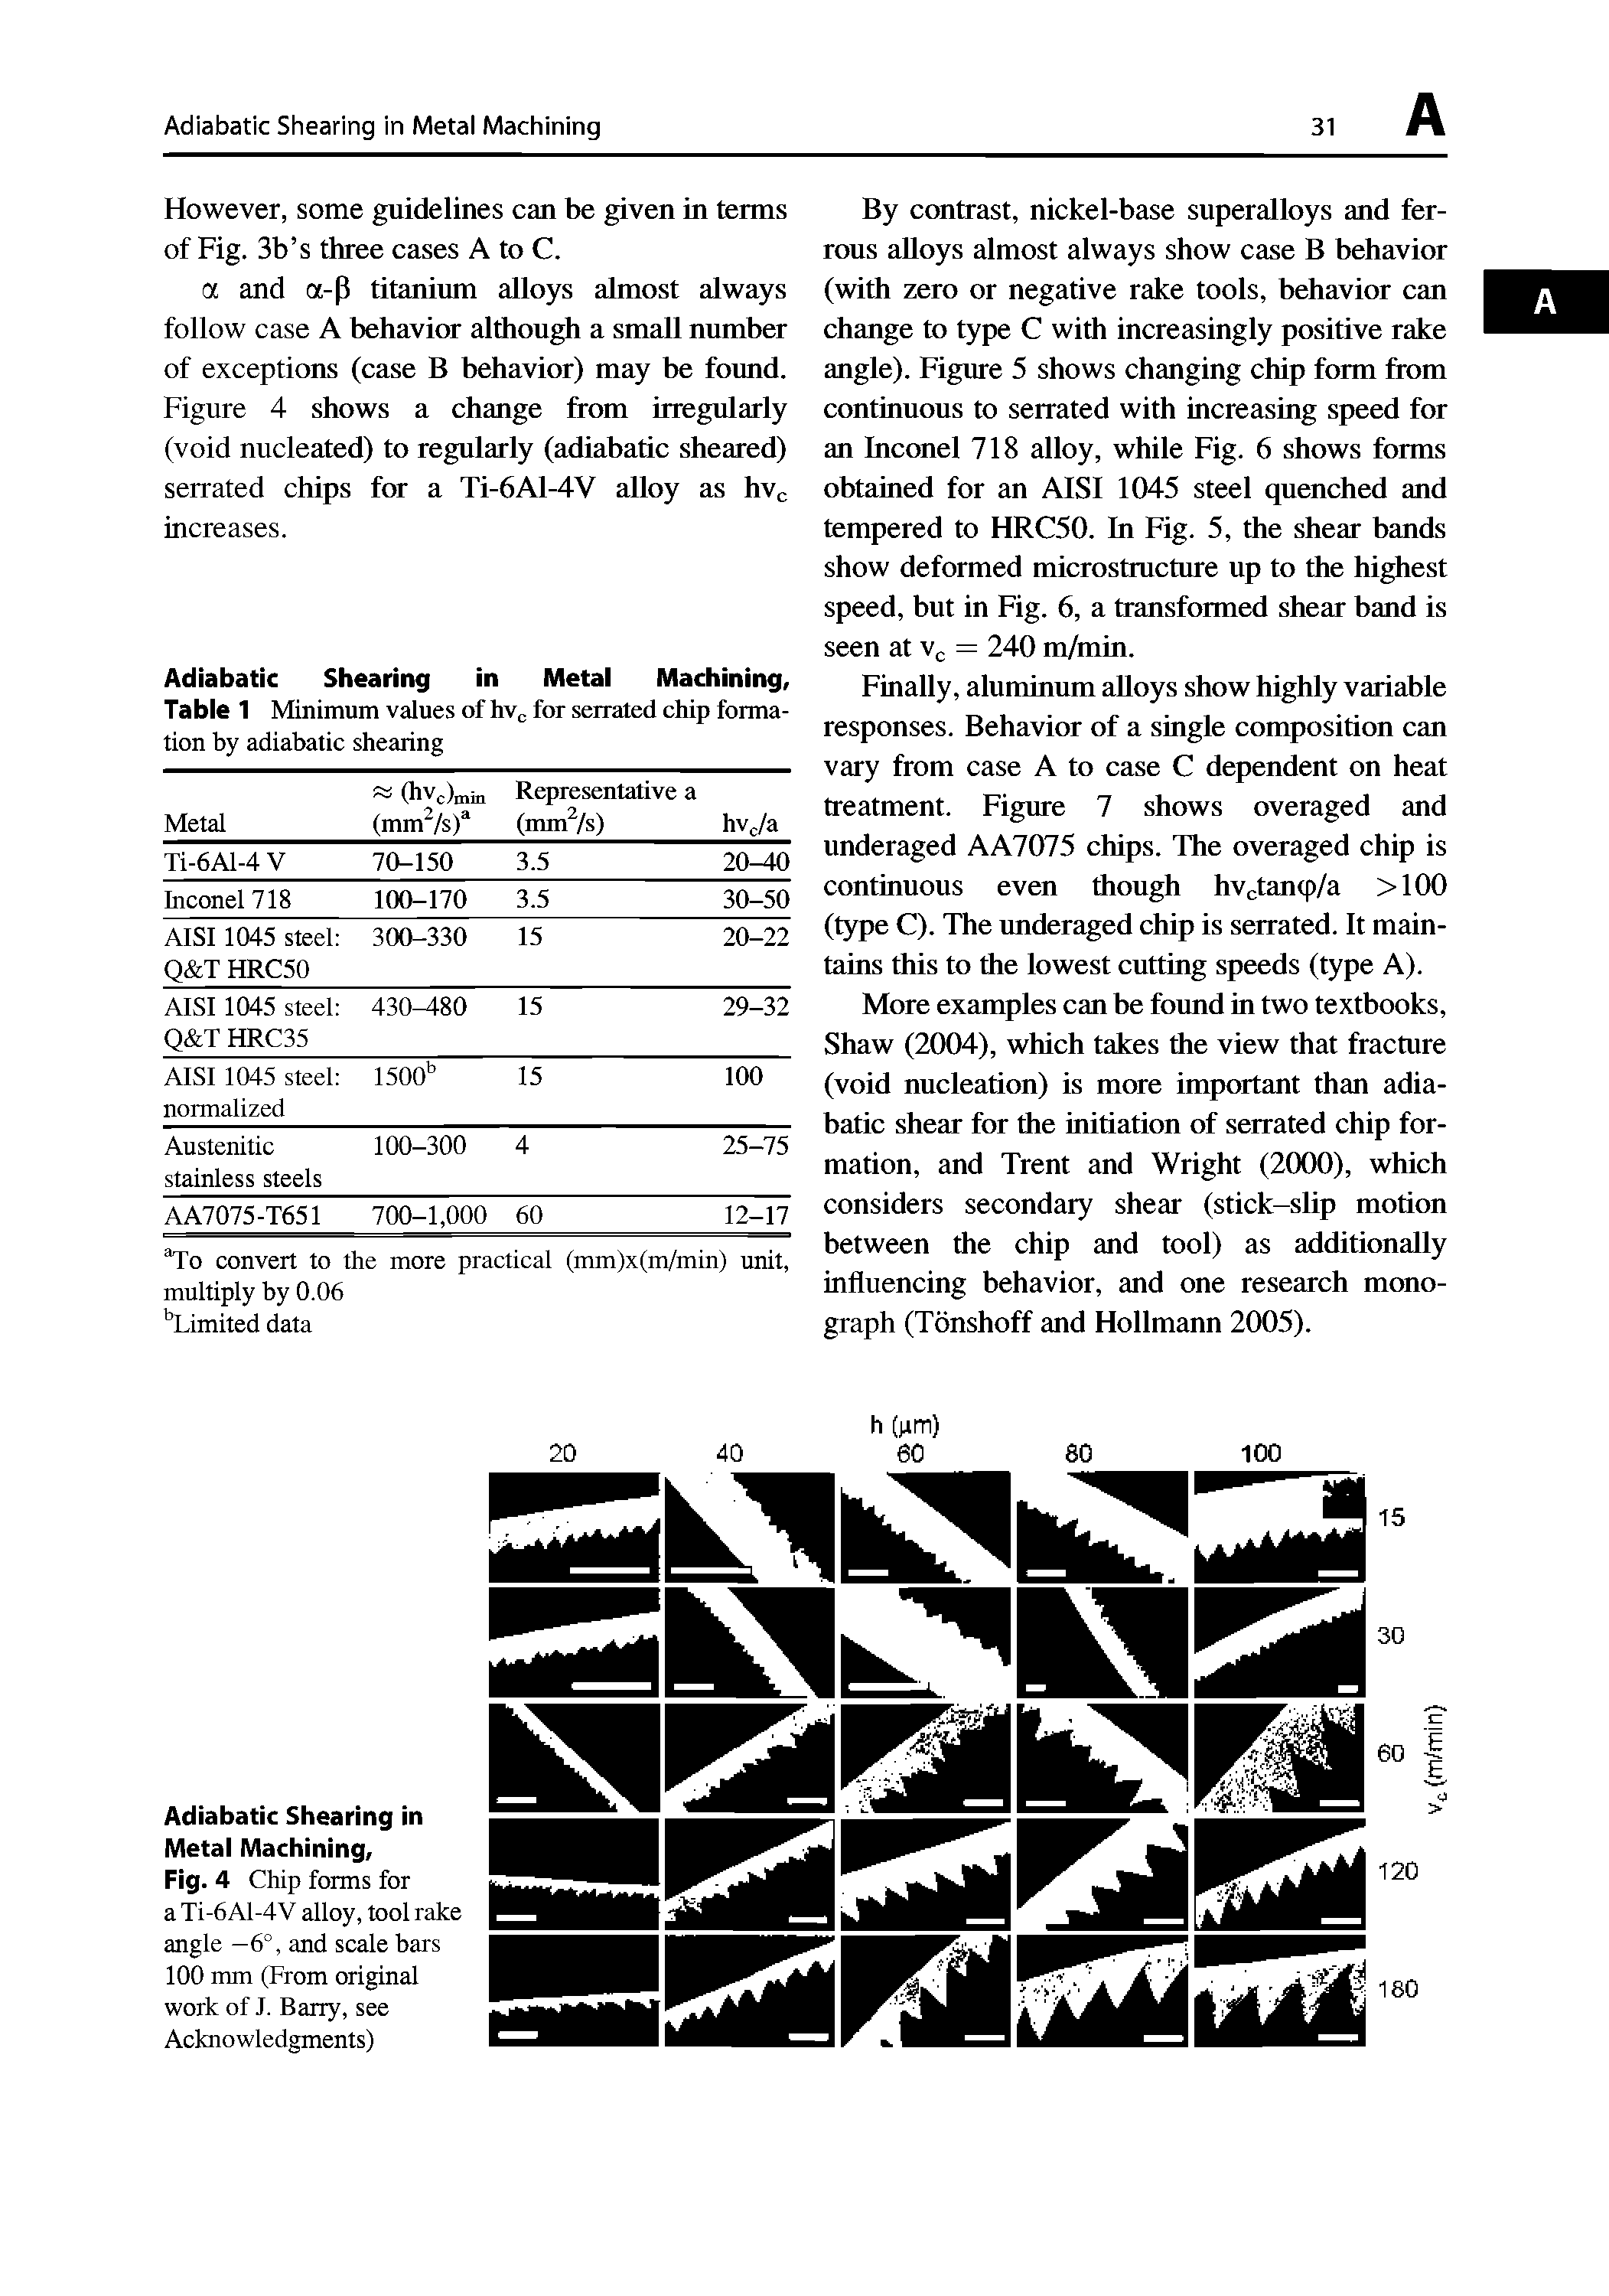 Fig. 4 Chip forms for a Ti-6A1-4V alloy, tool rake angle —6°, and scale bars 100 mm (From original work of J. Barry, see Acknowledgments)...